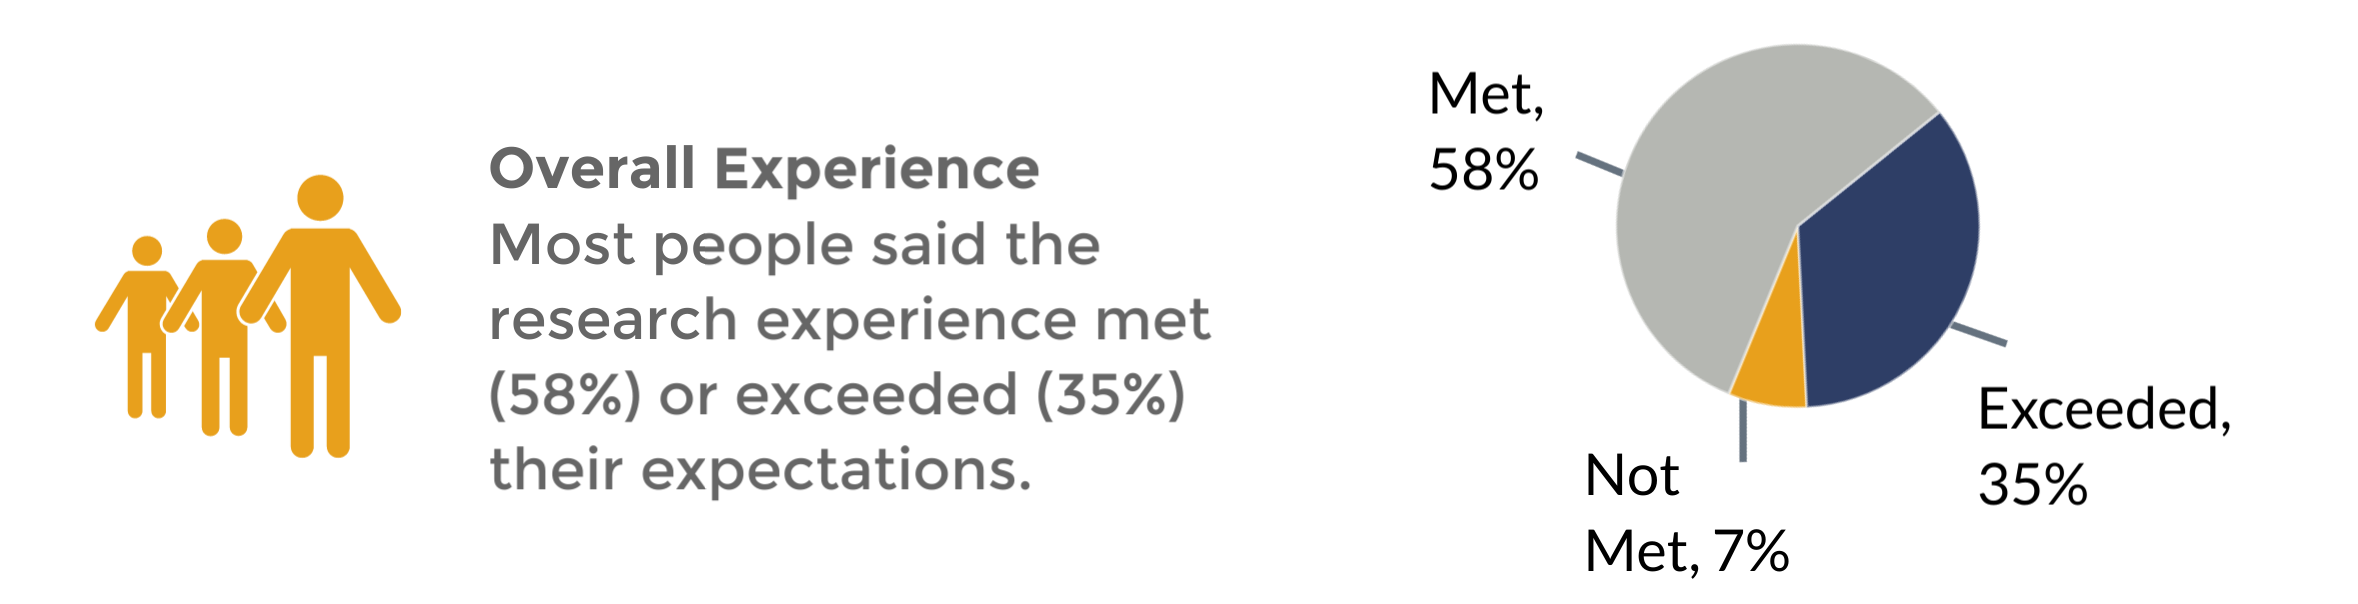 Overall Experience: Most people said the research experience met (58%) or exceeded (35%) their expectations.